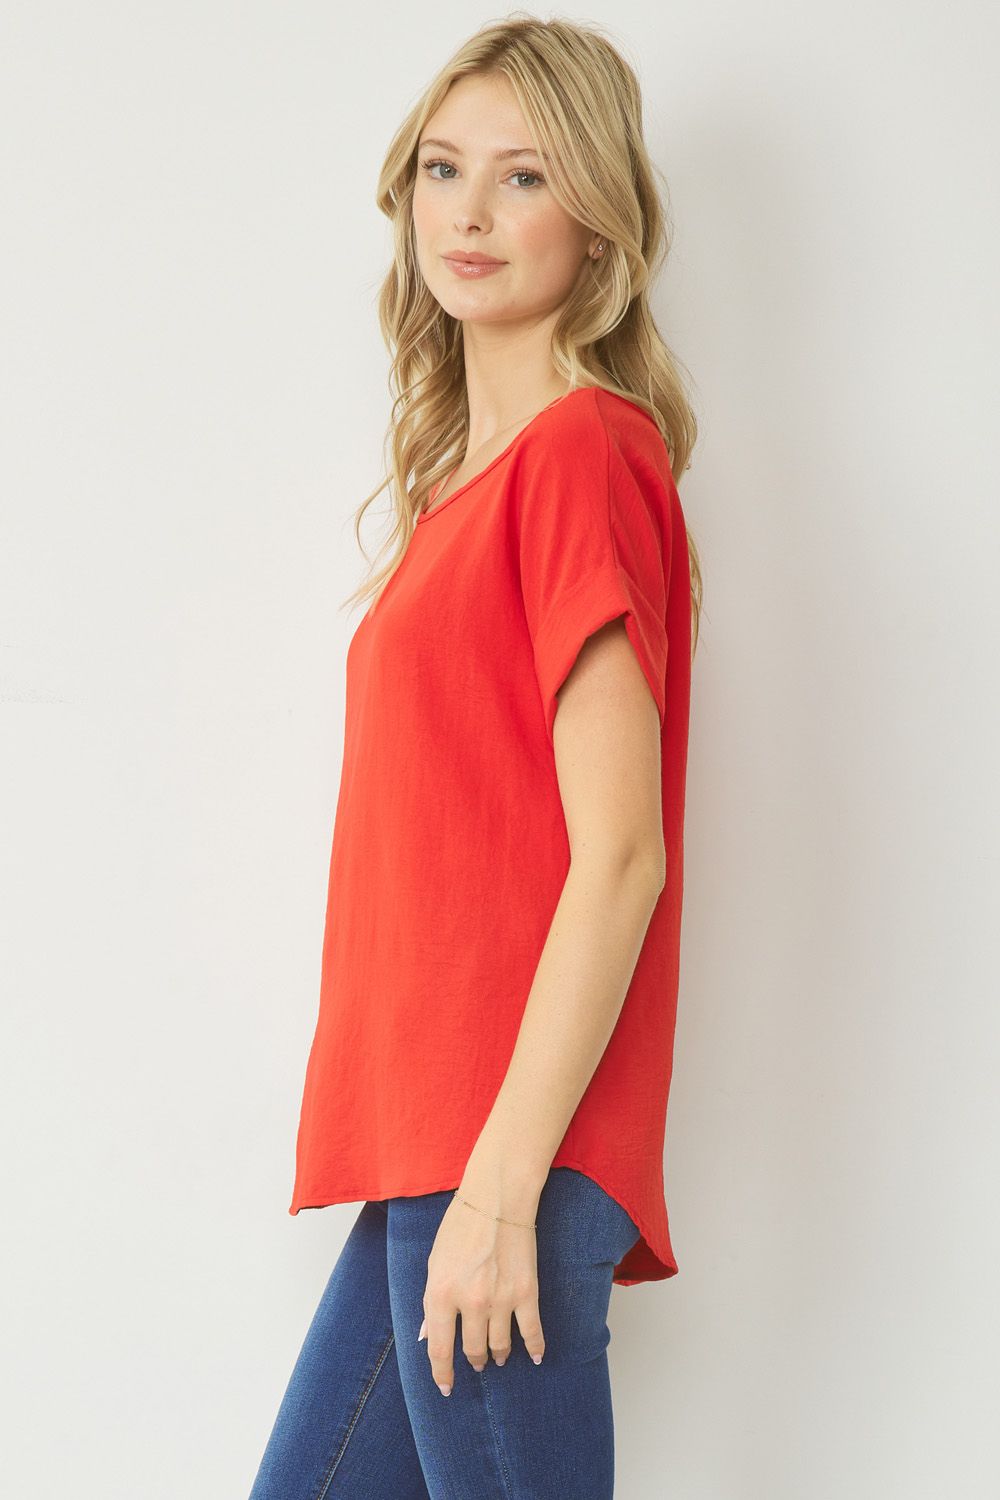 "My Everyday" Top (Tomato) - Happily Ever Aften